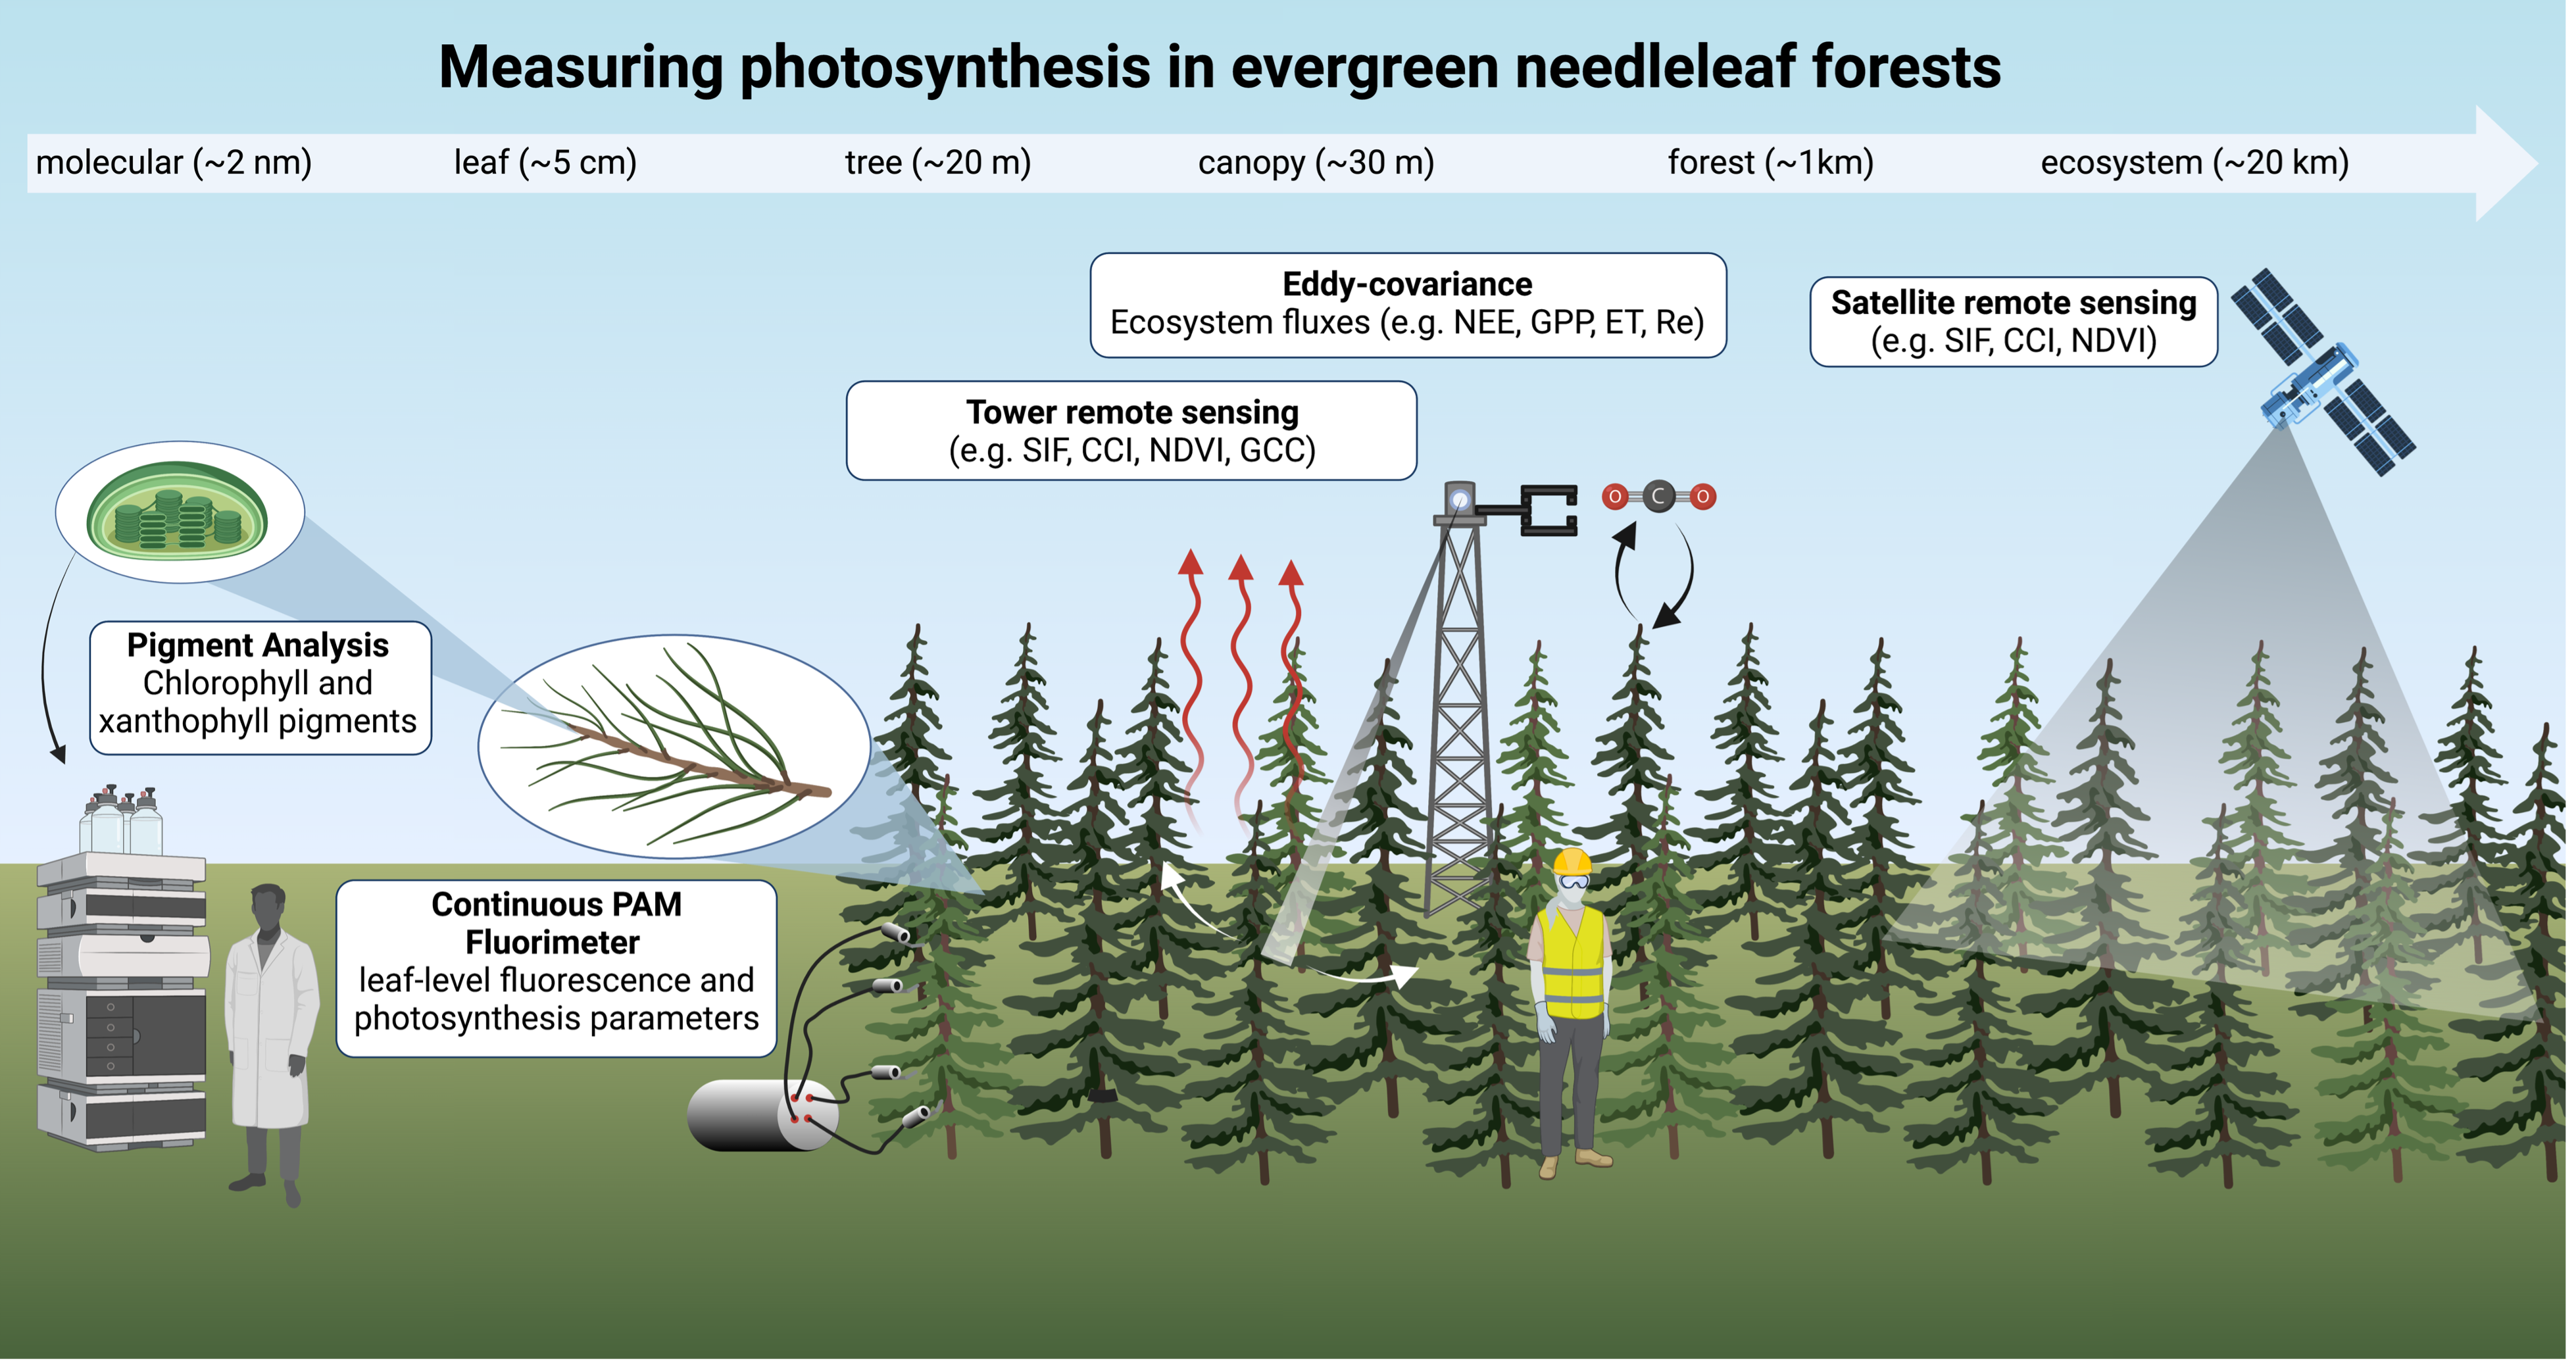 Summary of ways to measure evergreen needleleaf forest photosynthesis from the molecular to ecosystem scale and data types highlighted in this overview.